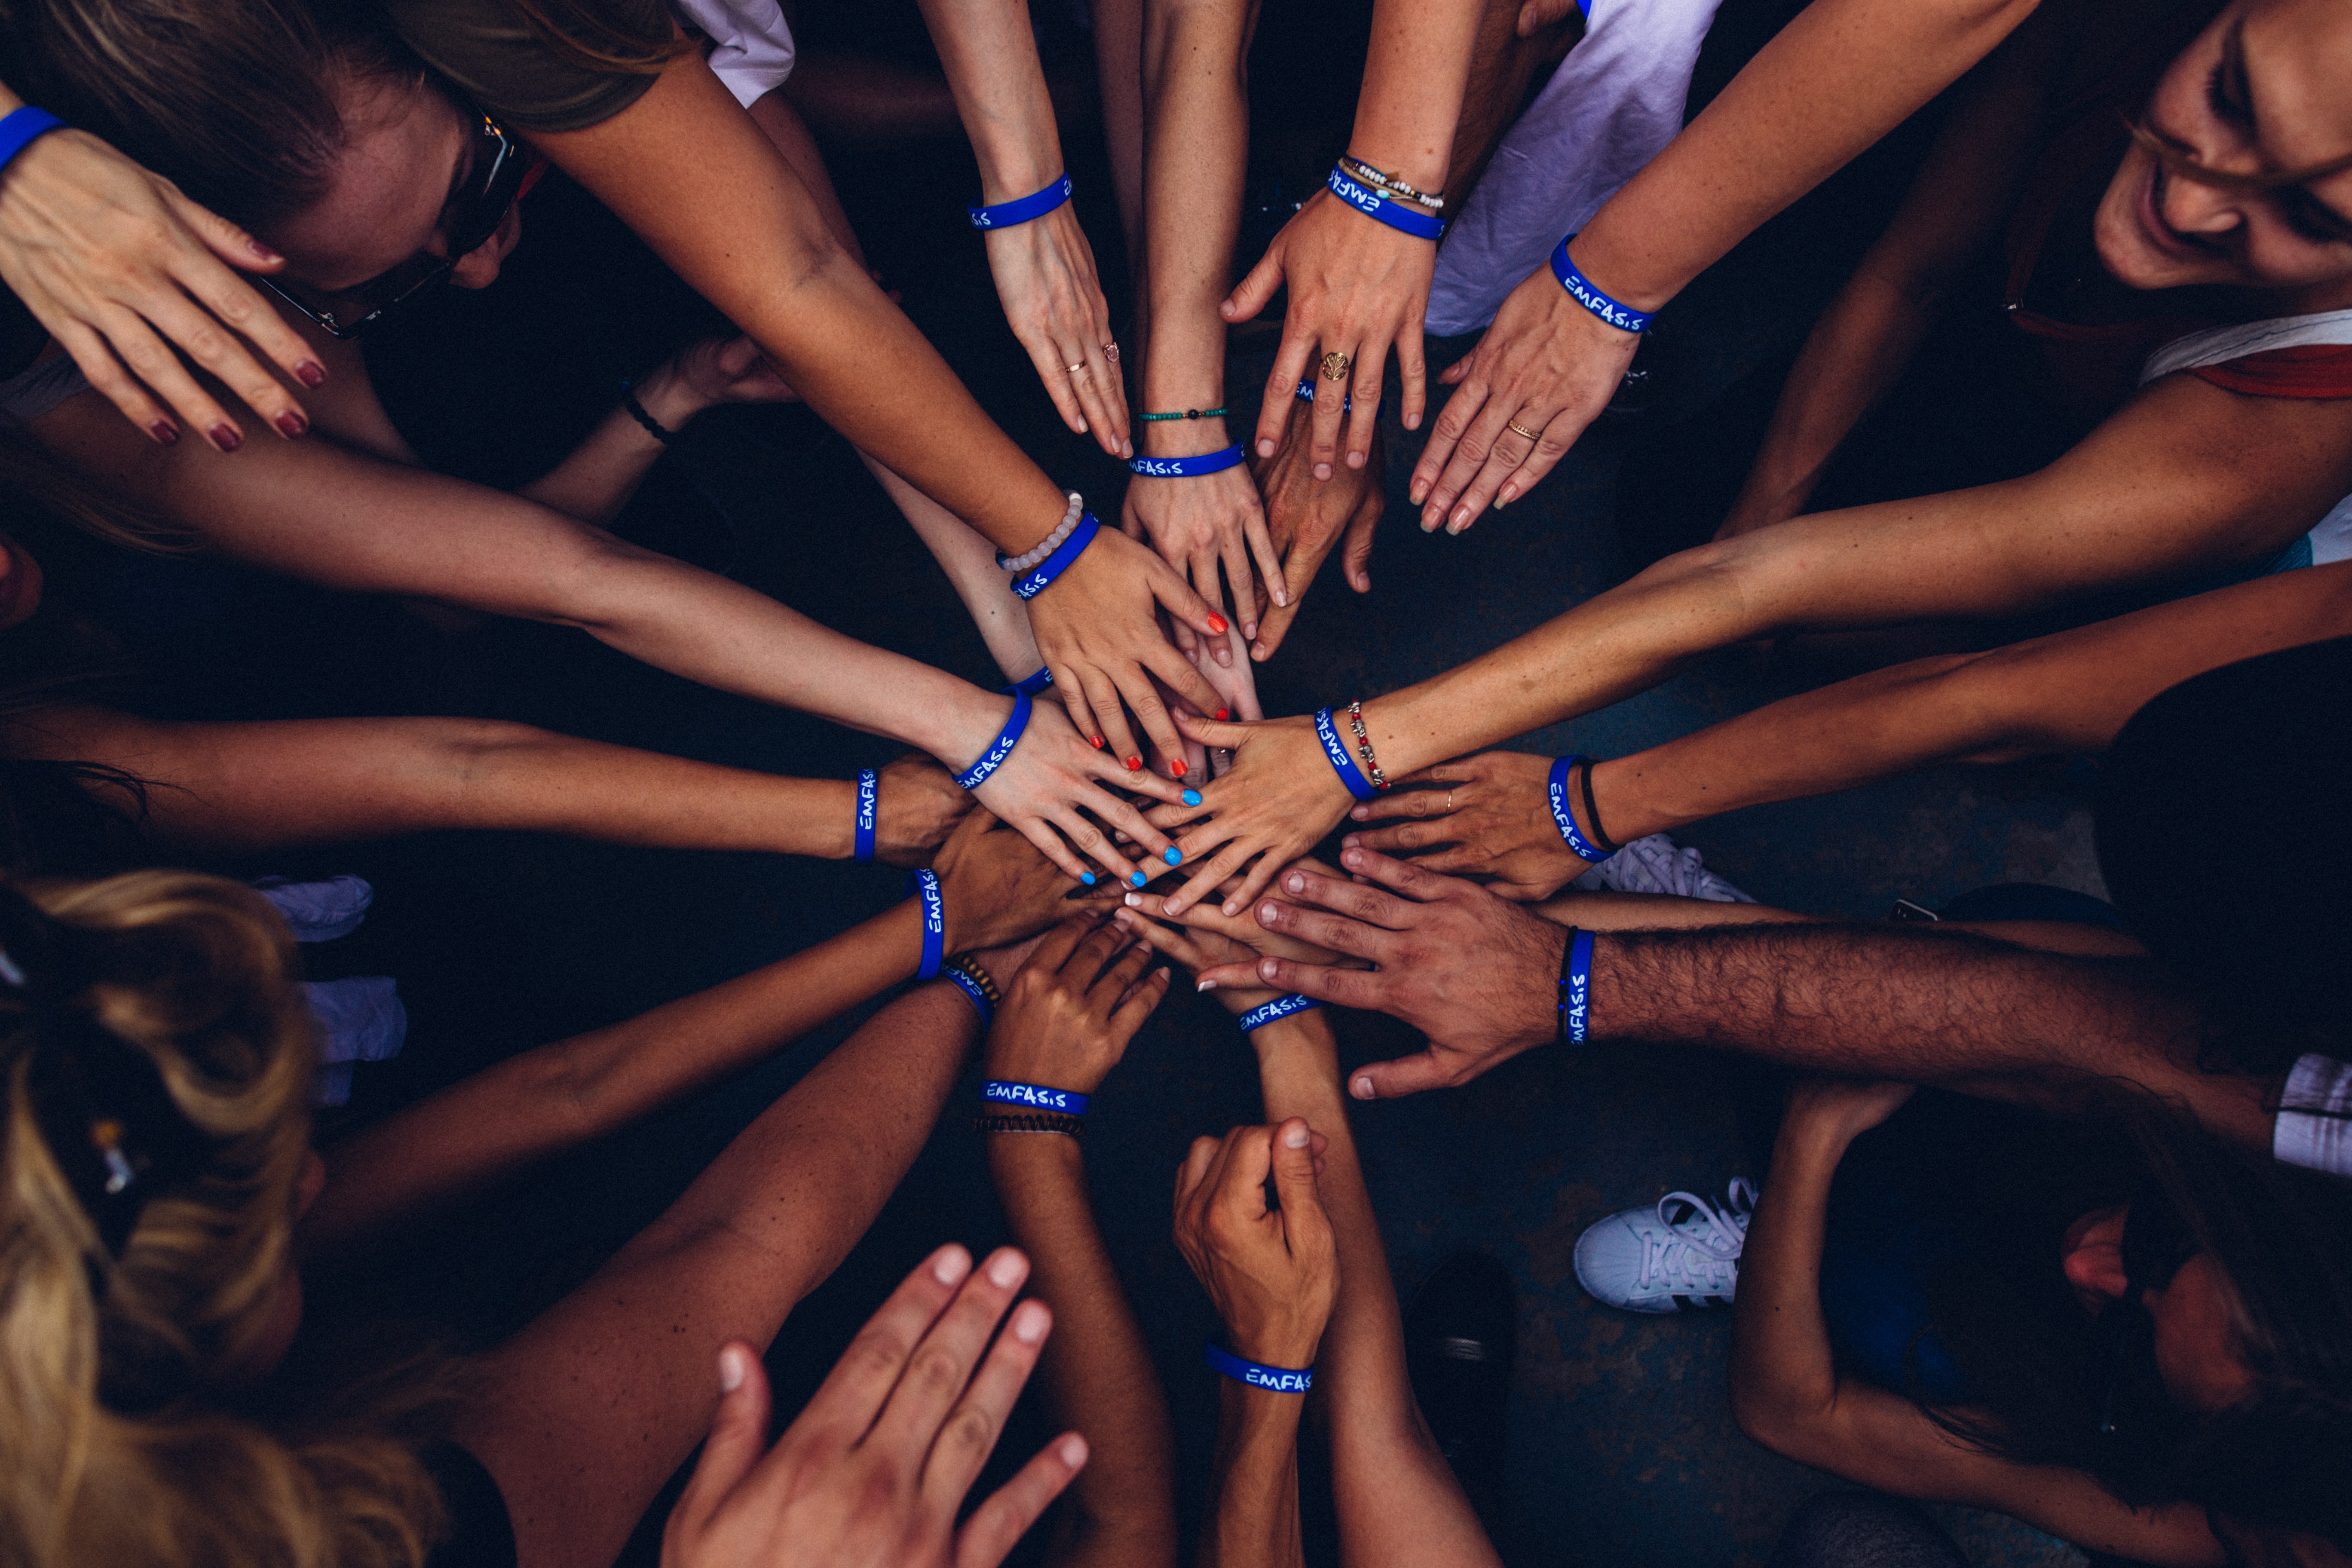 Team doing a hands-in huddle; image by Perry Grone, via Unsplash.com.